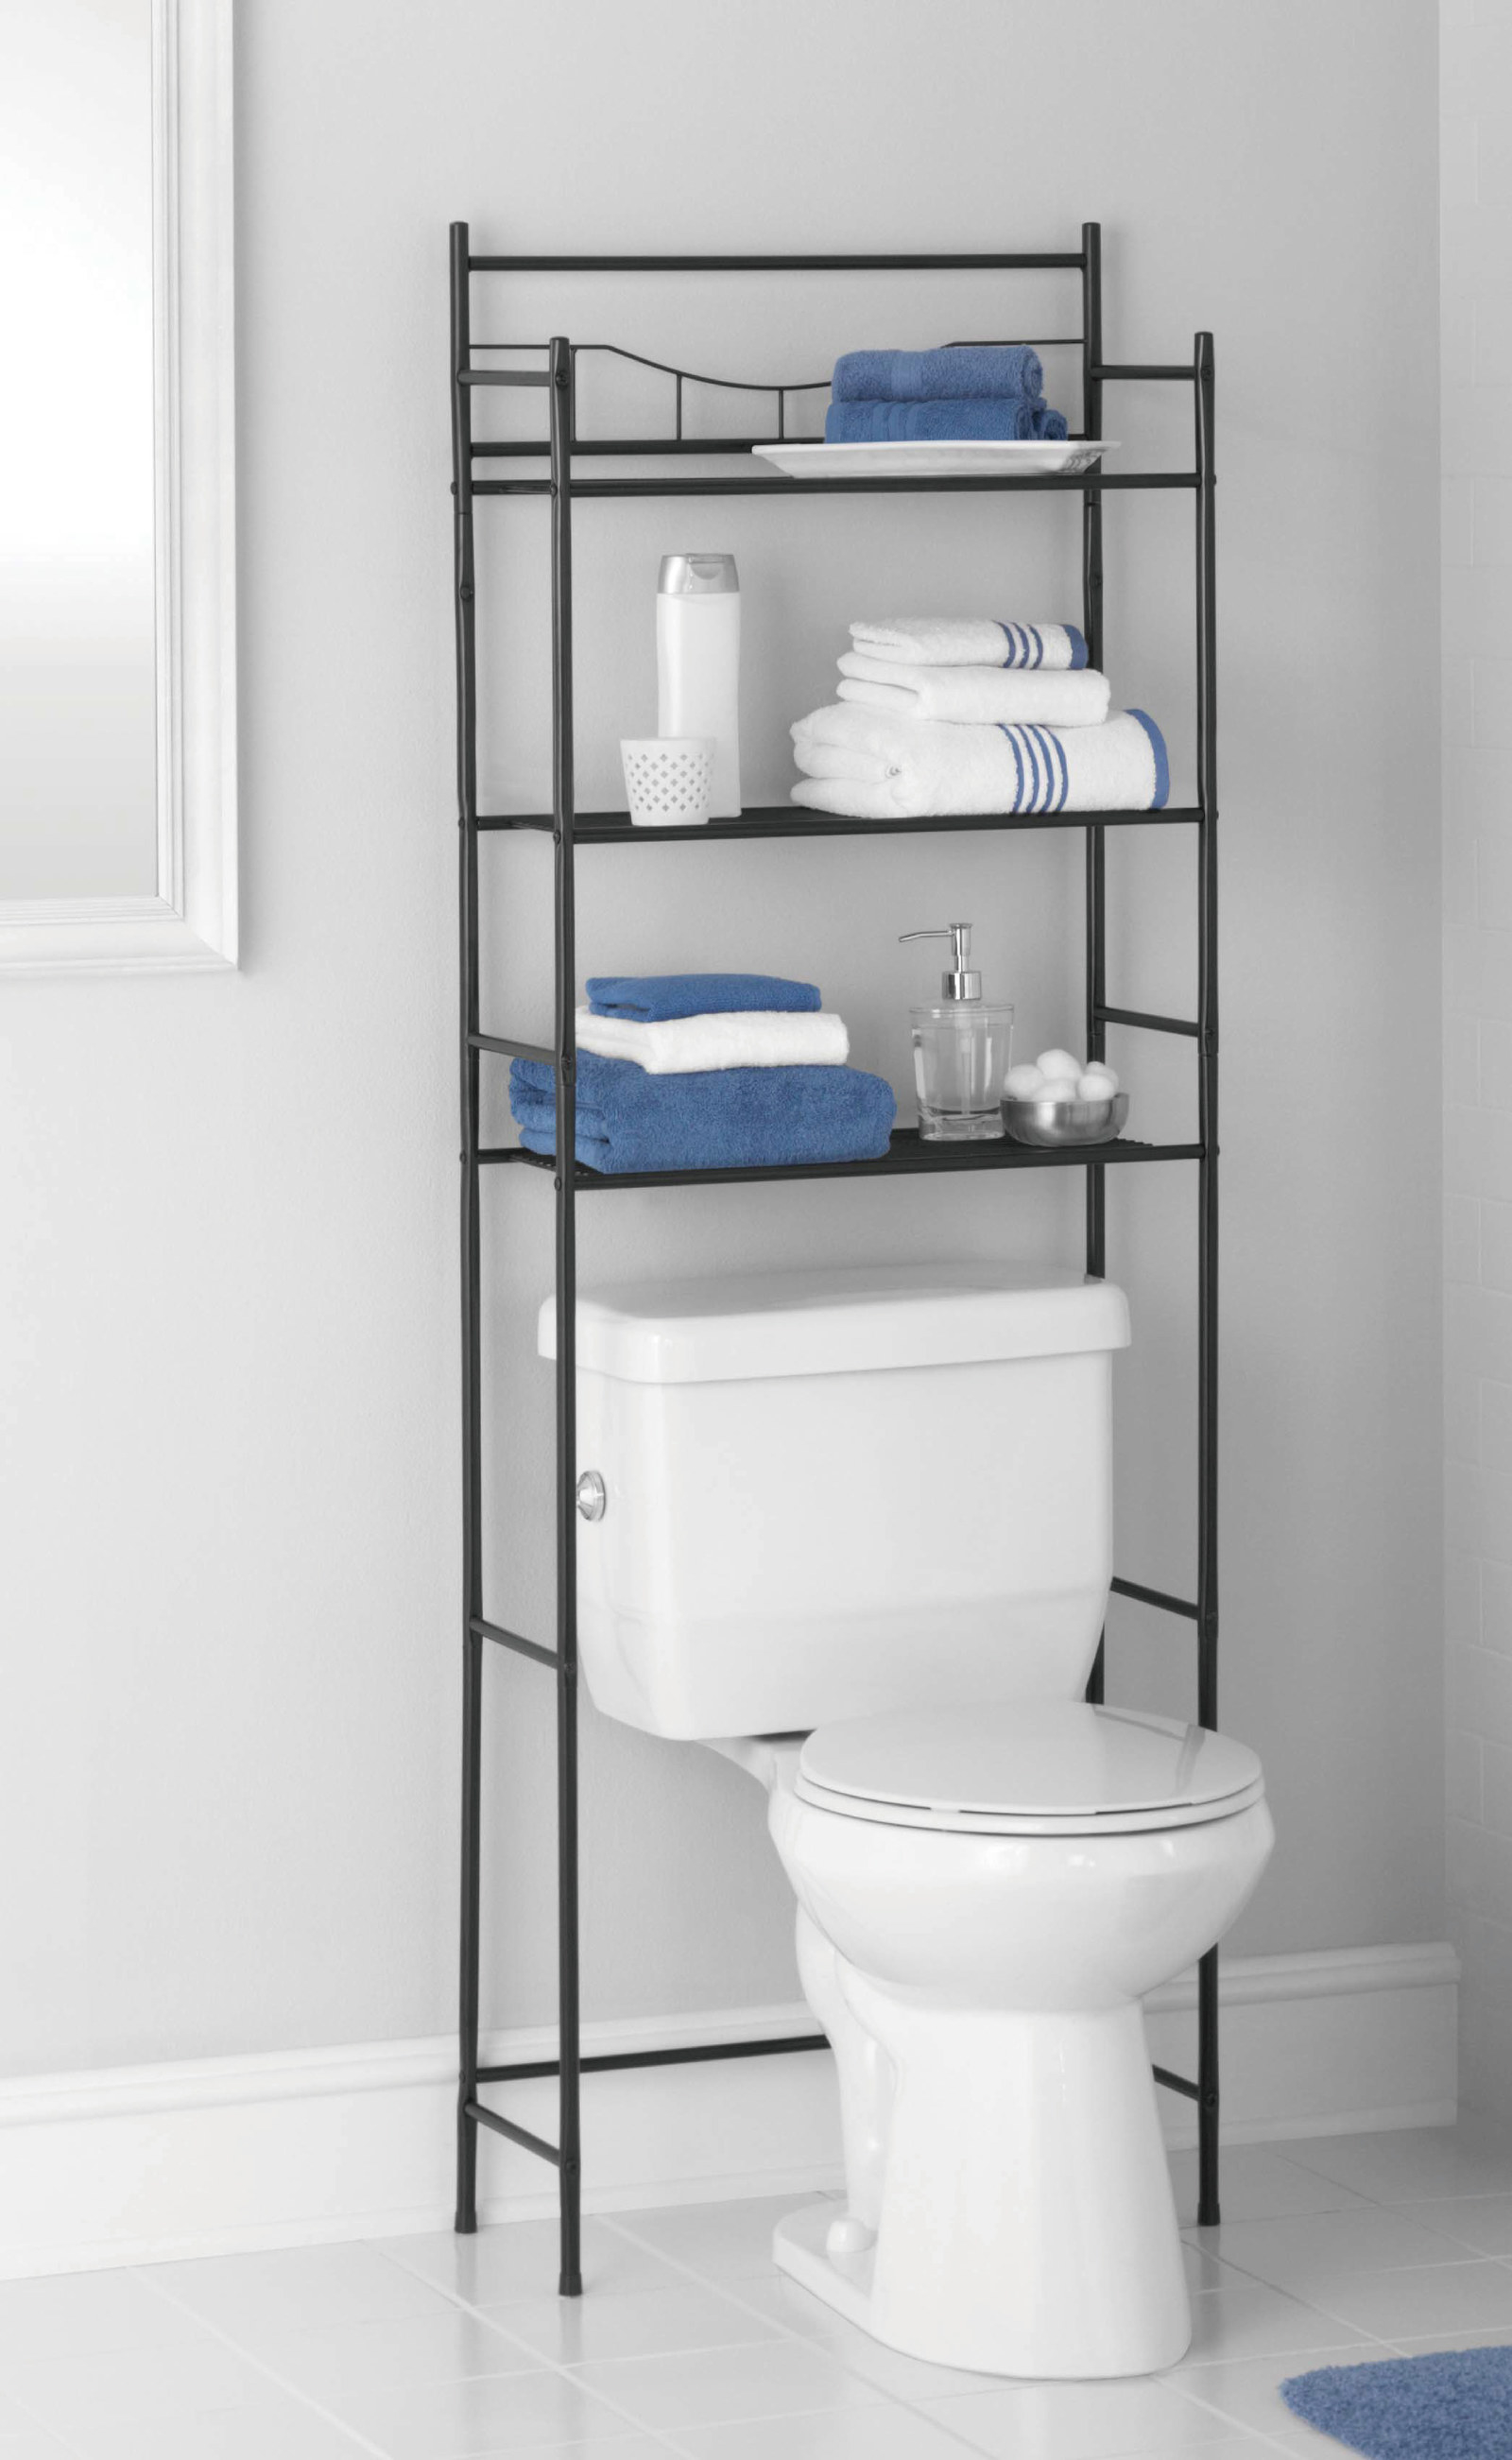 The shelf  holding various items over the toilet